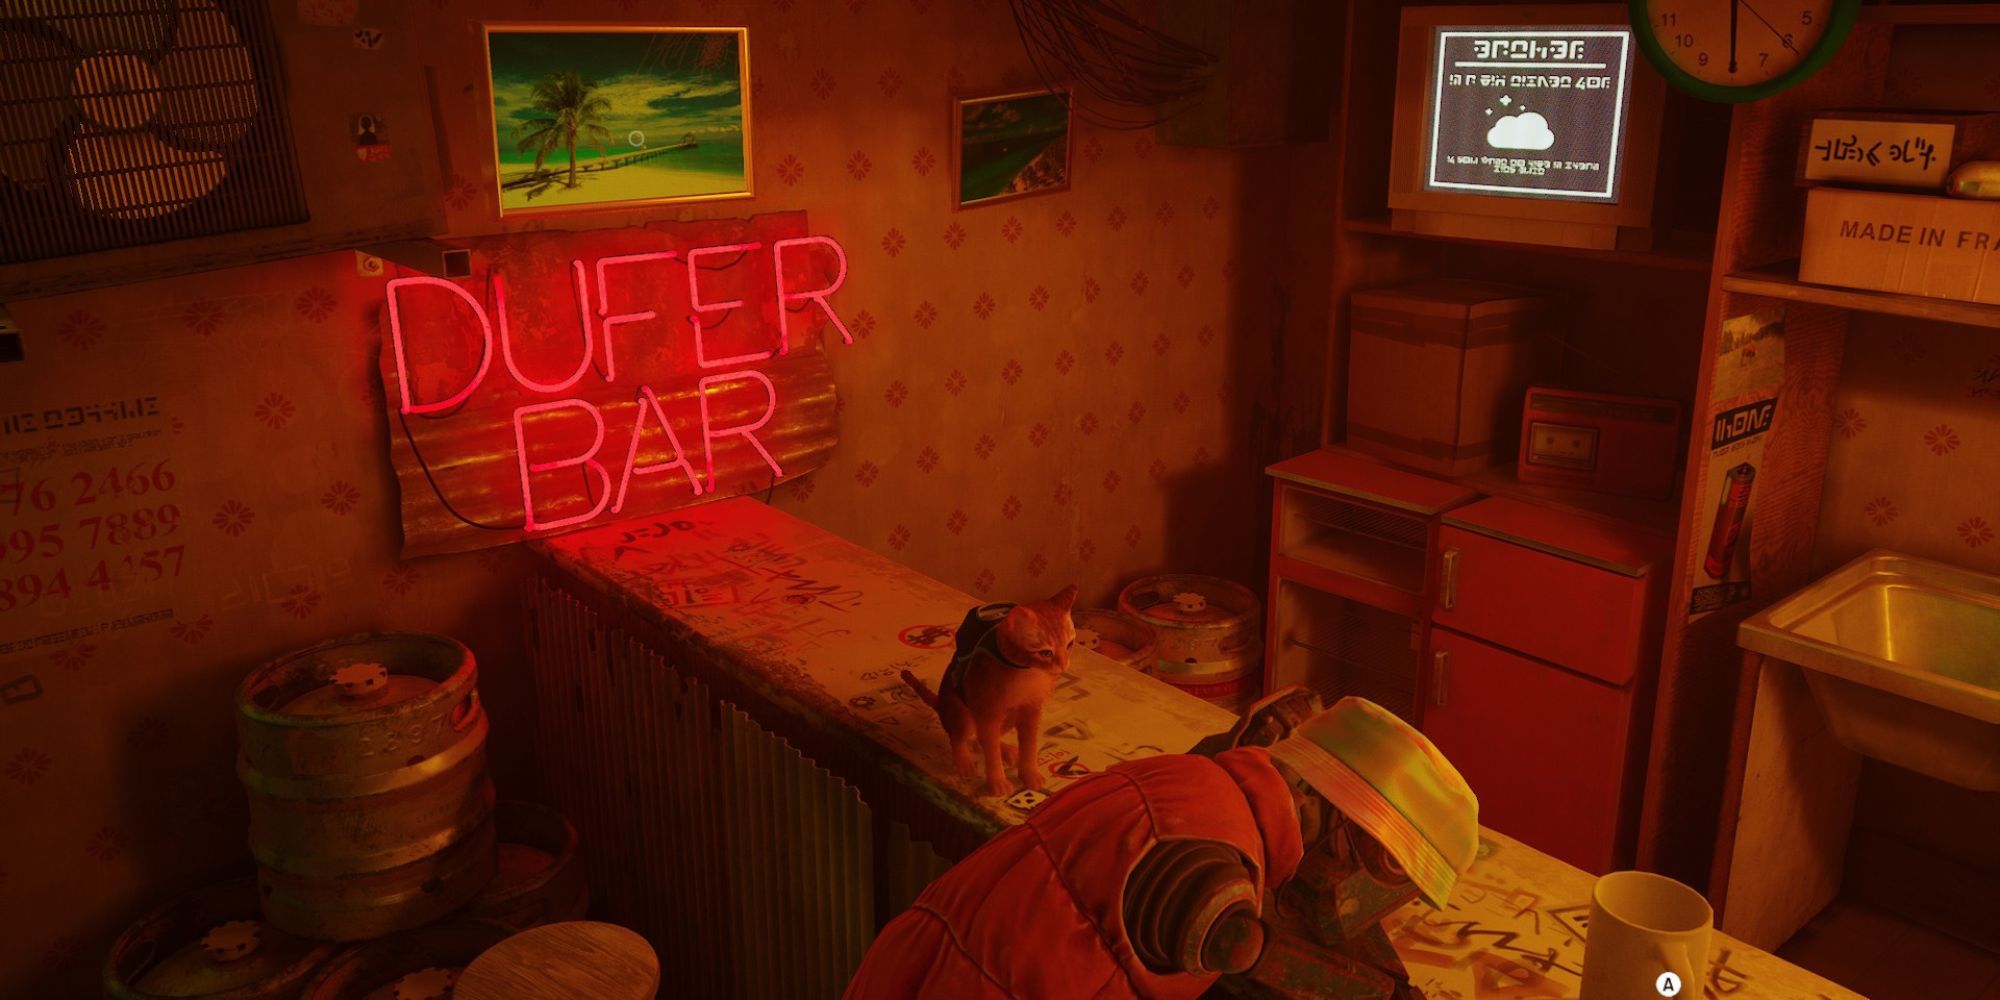 neon Duffer Bar sign sits by the bar counter in the slums, as Seamus is slumped over